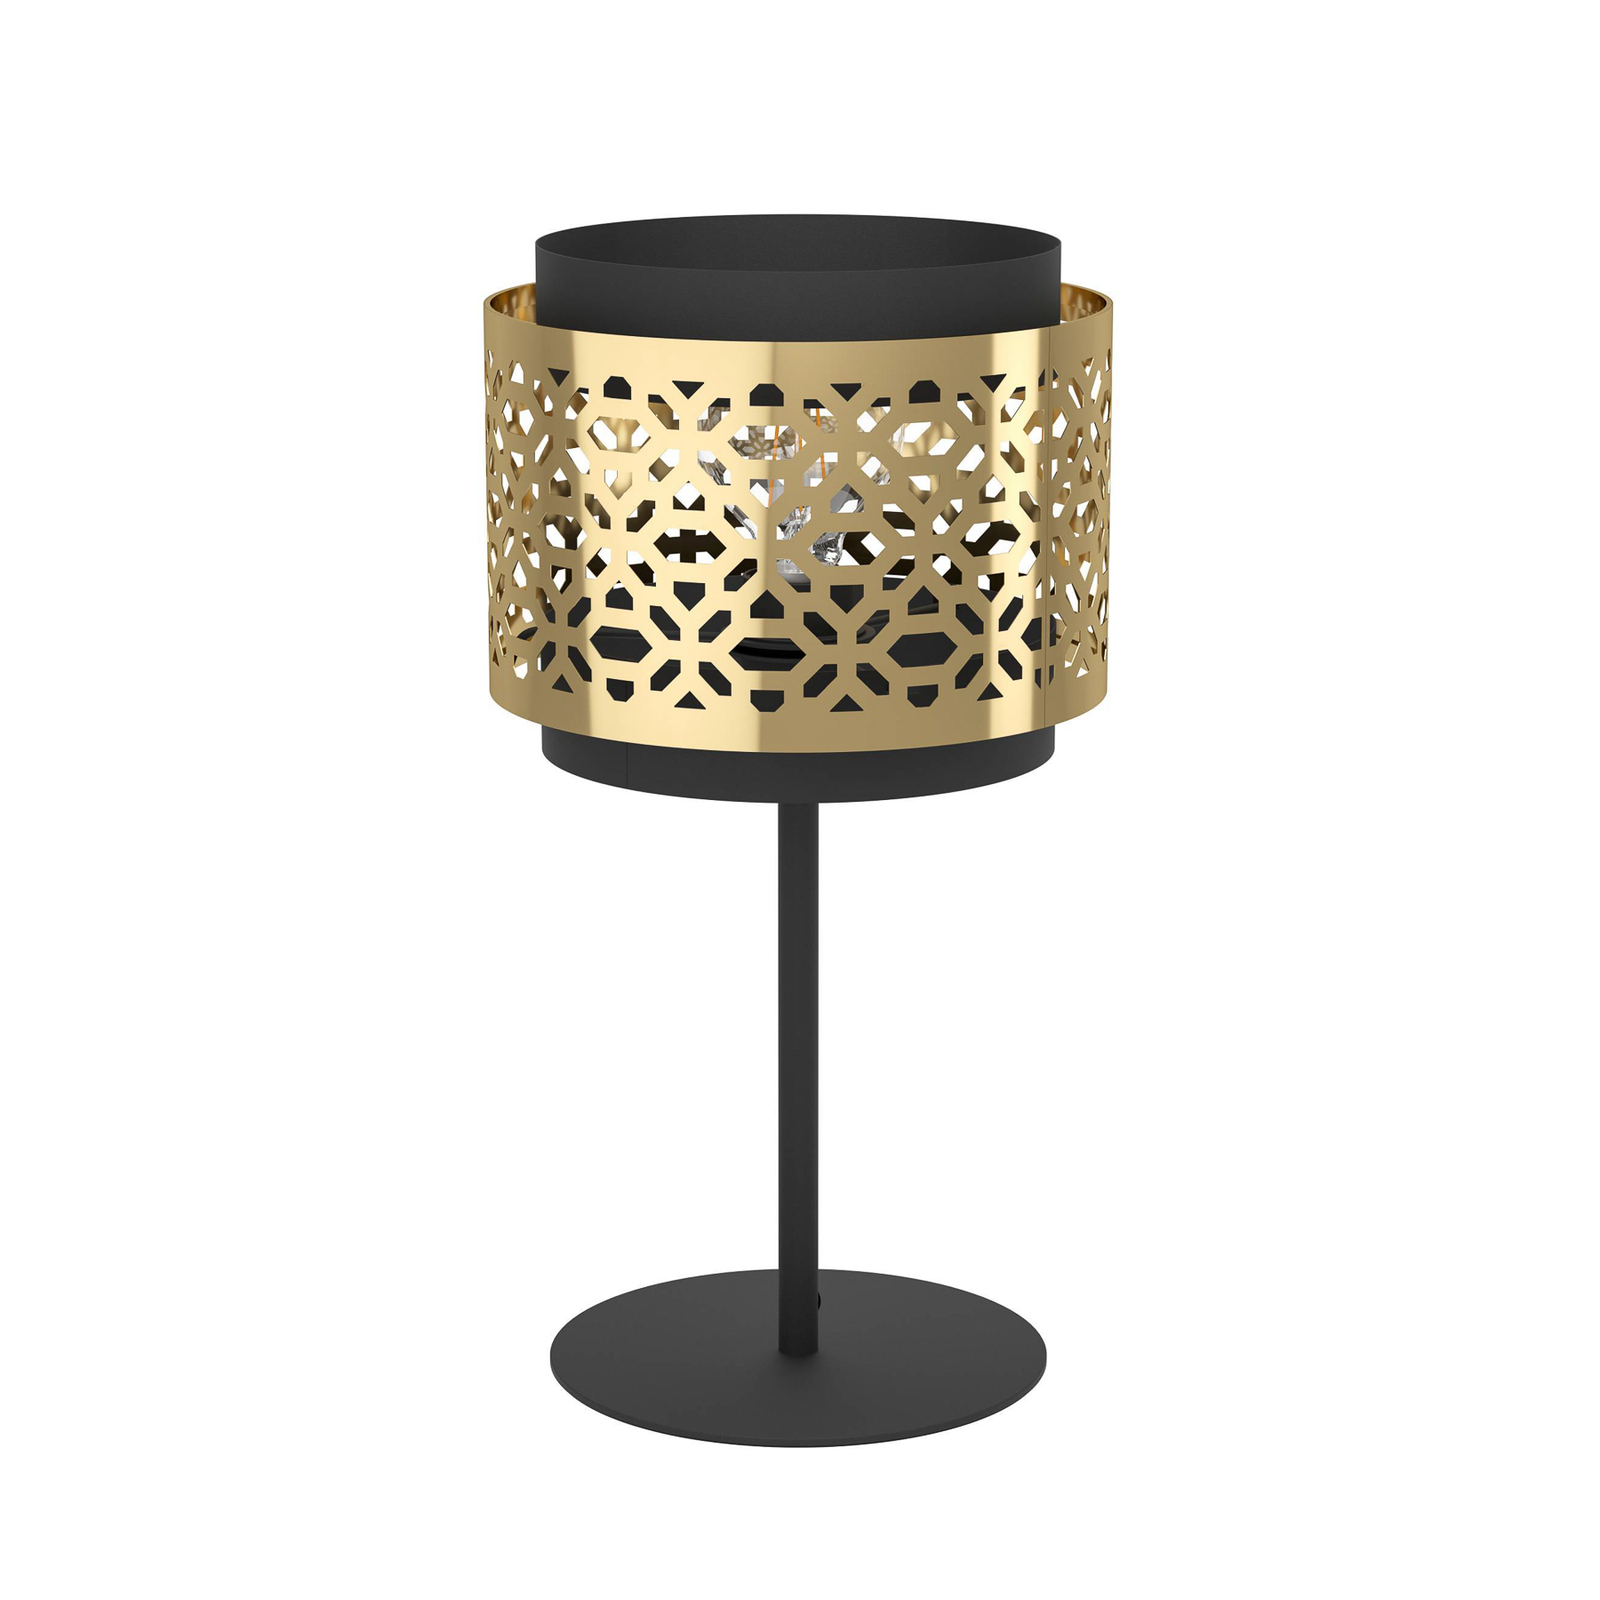 Sandbach table lamp in black and brass